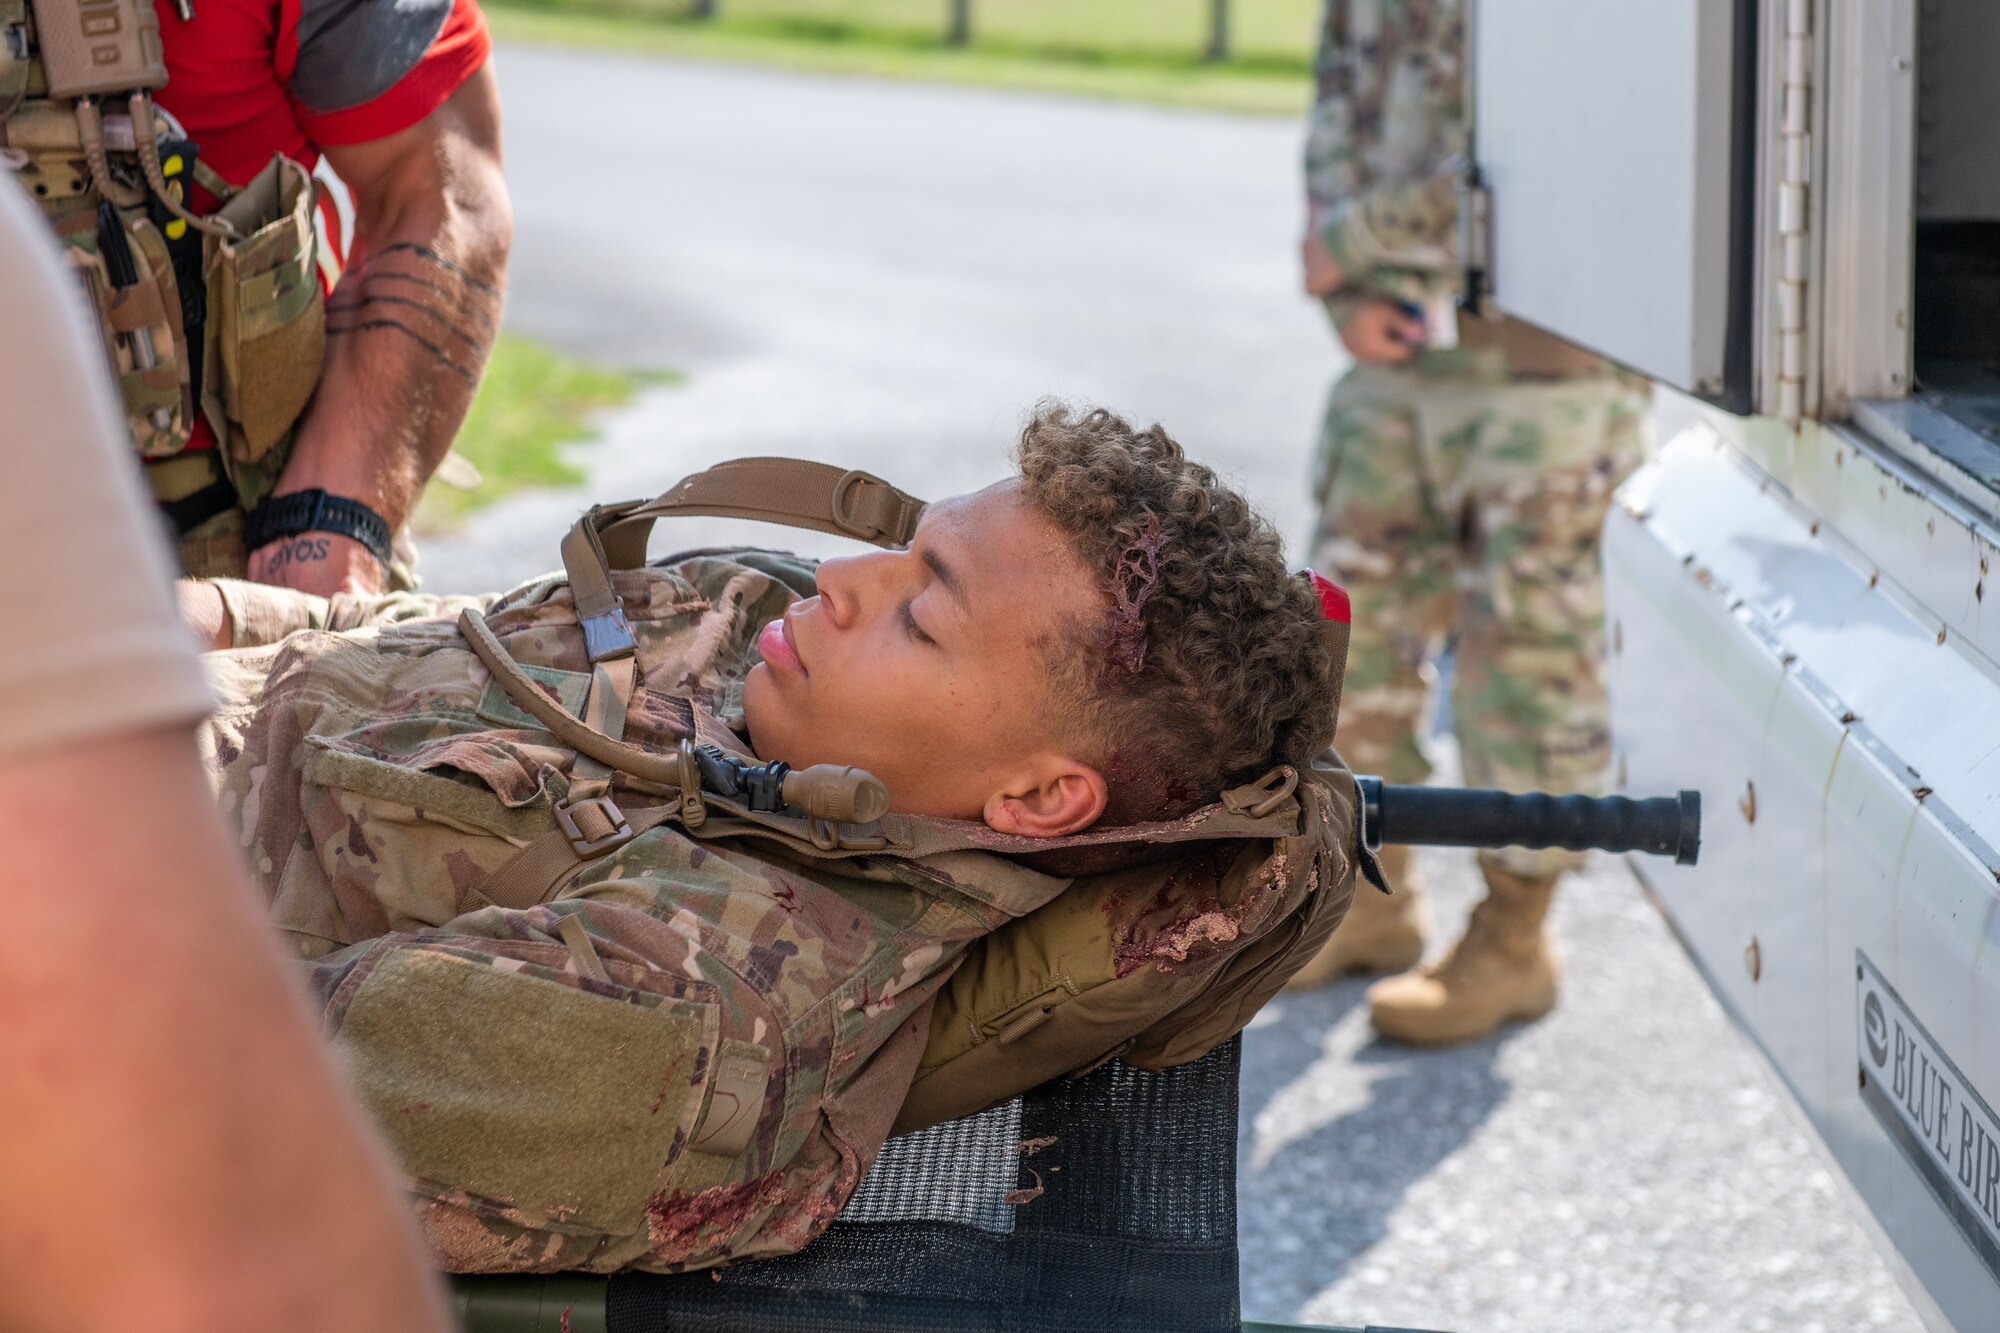 An Airman lays on a stretcher as two other military members raise him onto a bus